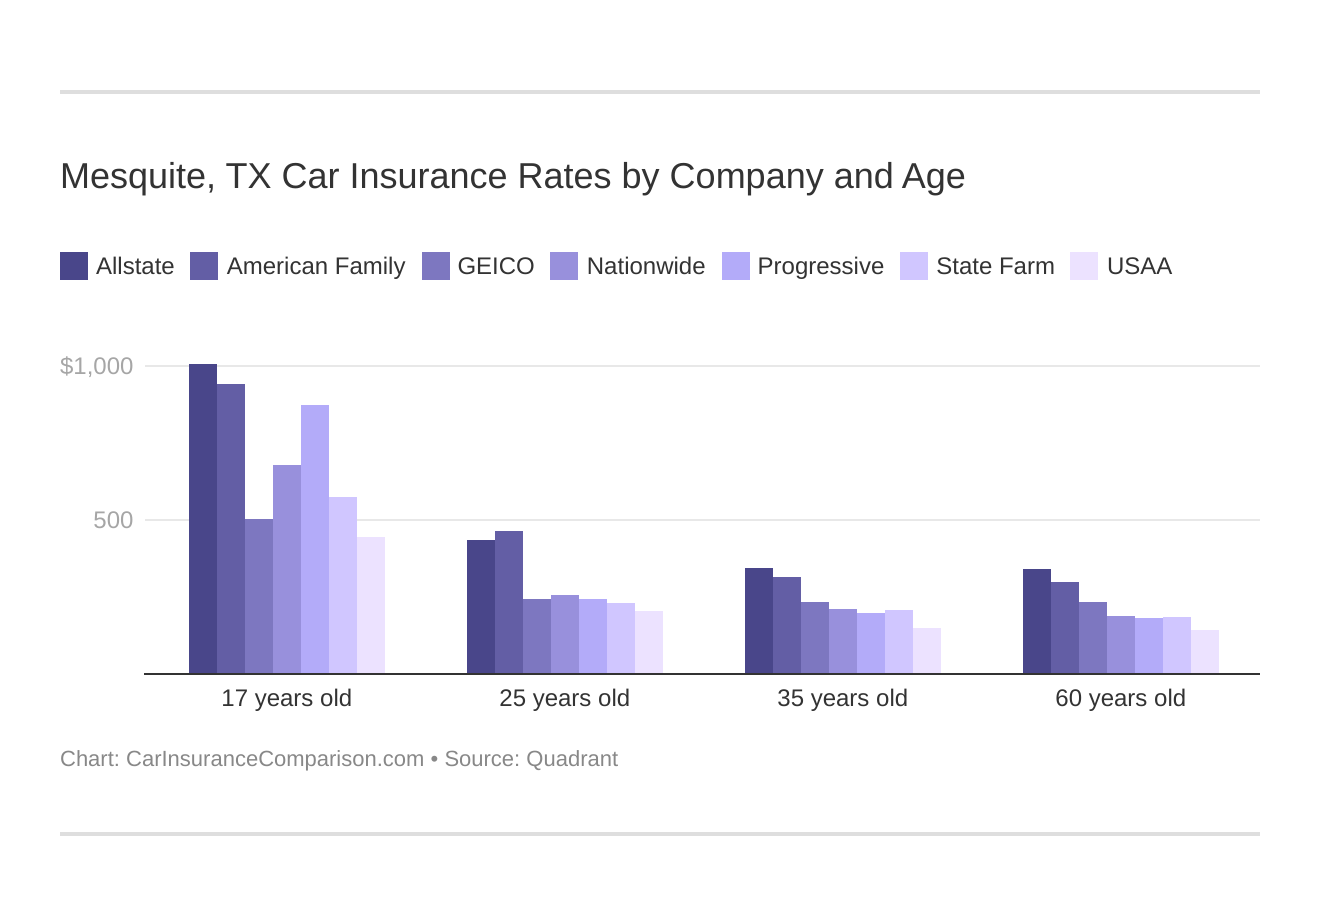 Mesquite, TX Car Insurance Rates by Company and Age